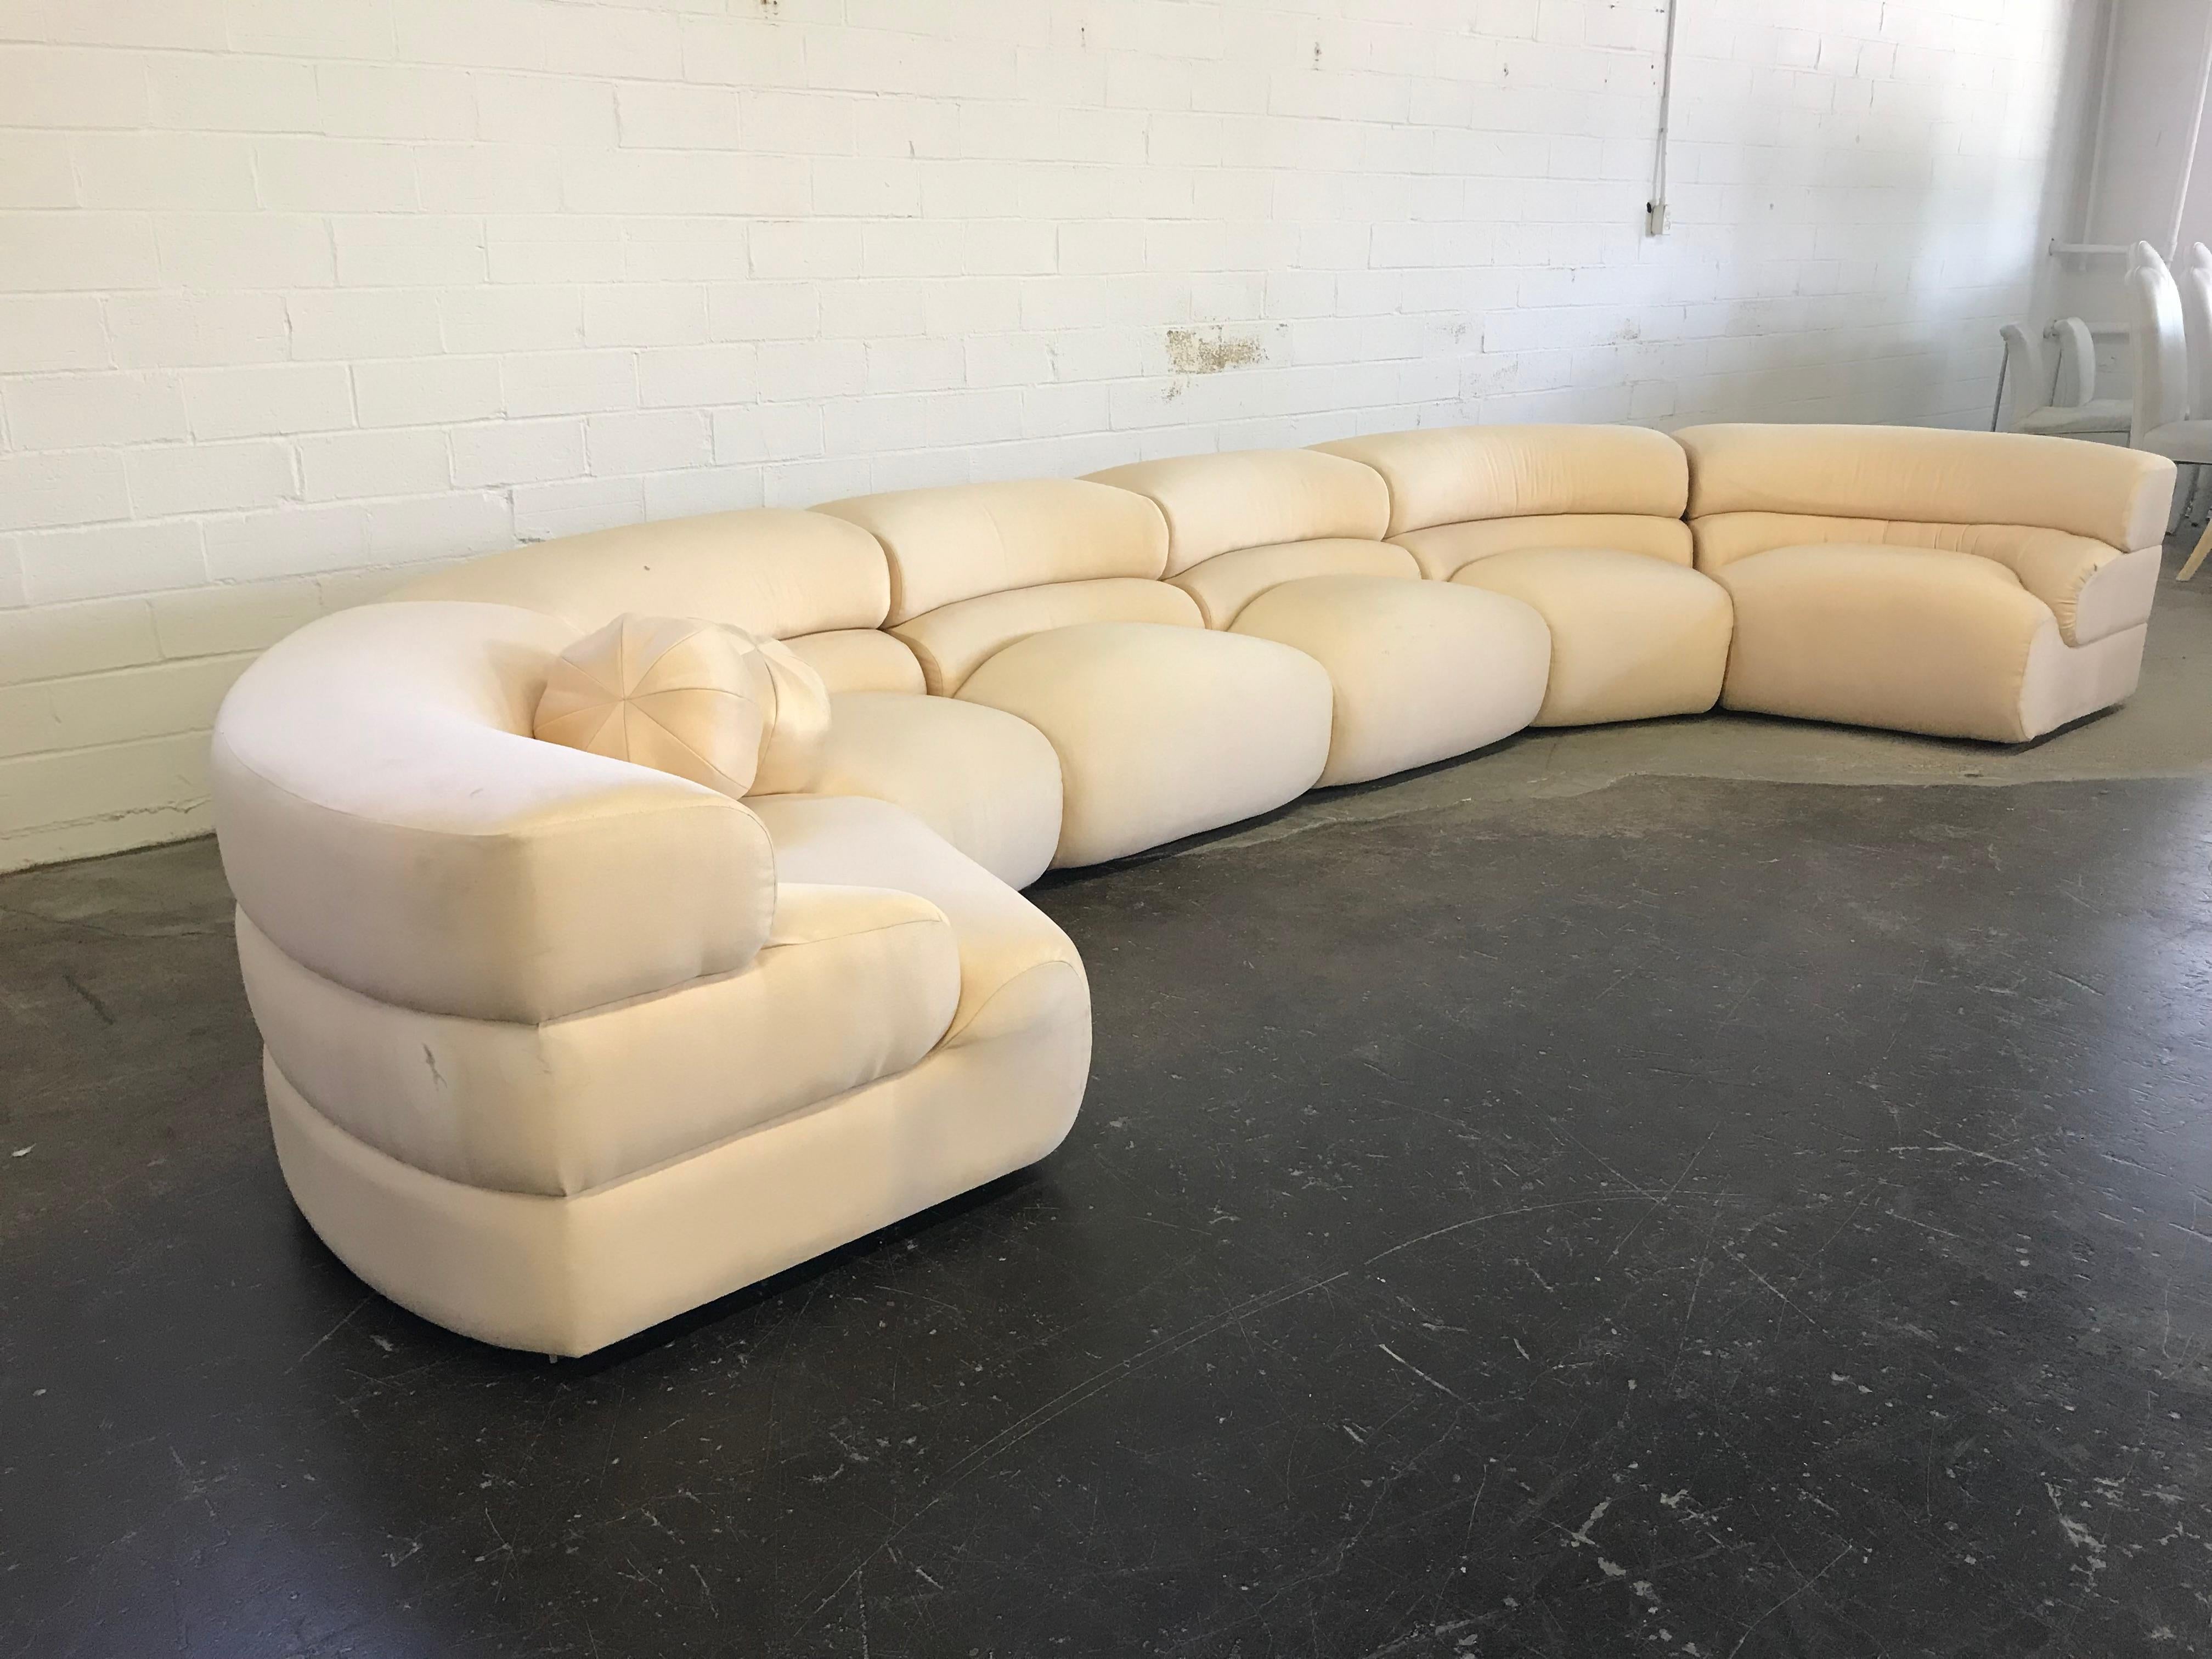 This sectional measures 168 inches in length but can be arranged in more of a semi circle than the curved arrangement show in the pictures. New upholstery recommended.